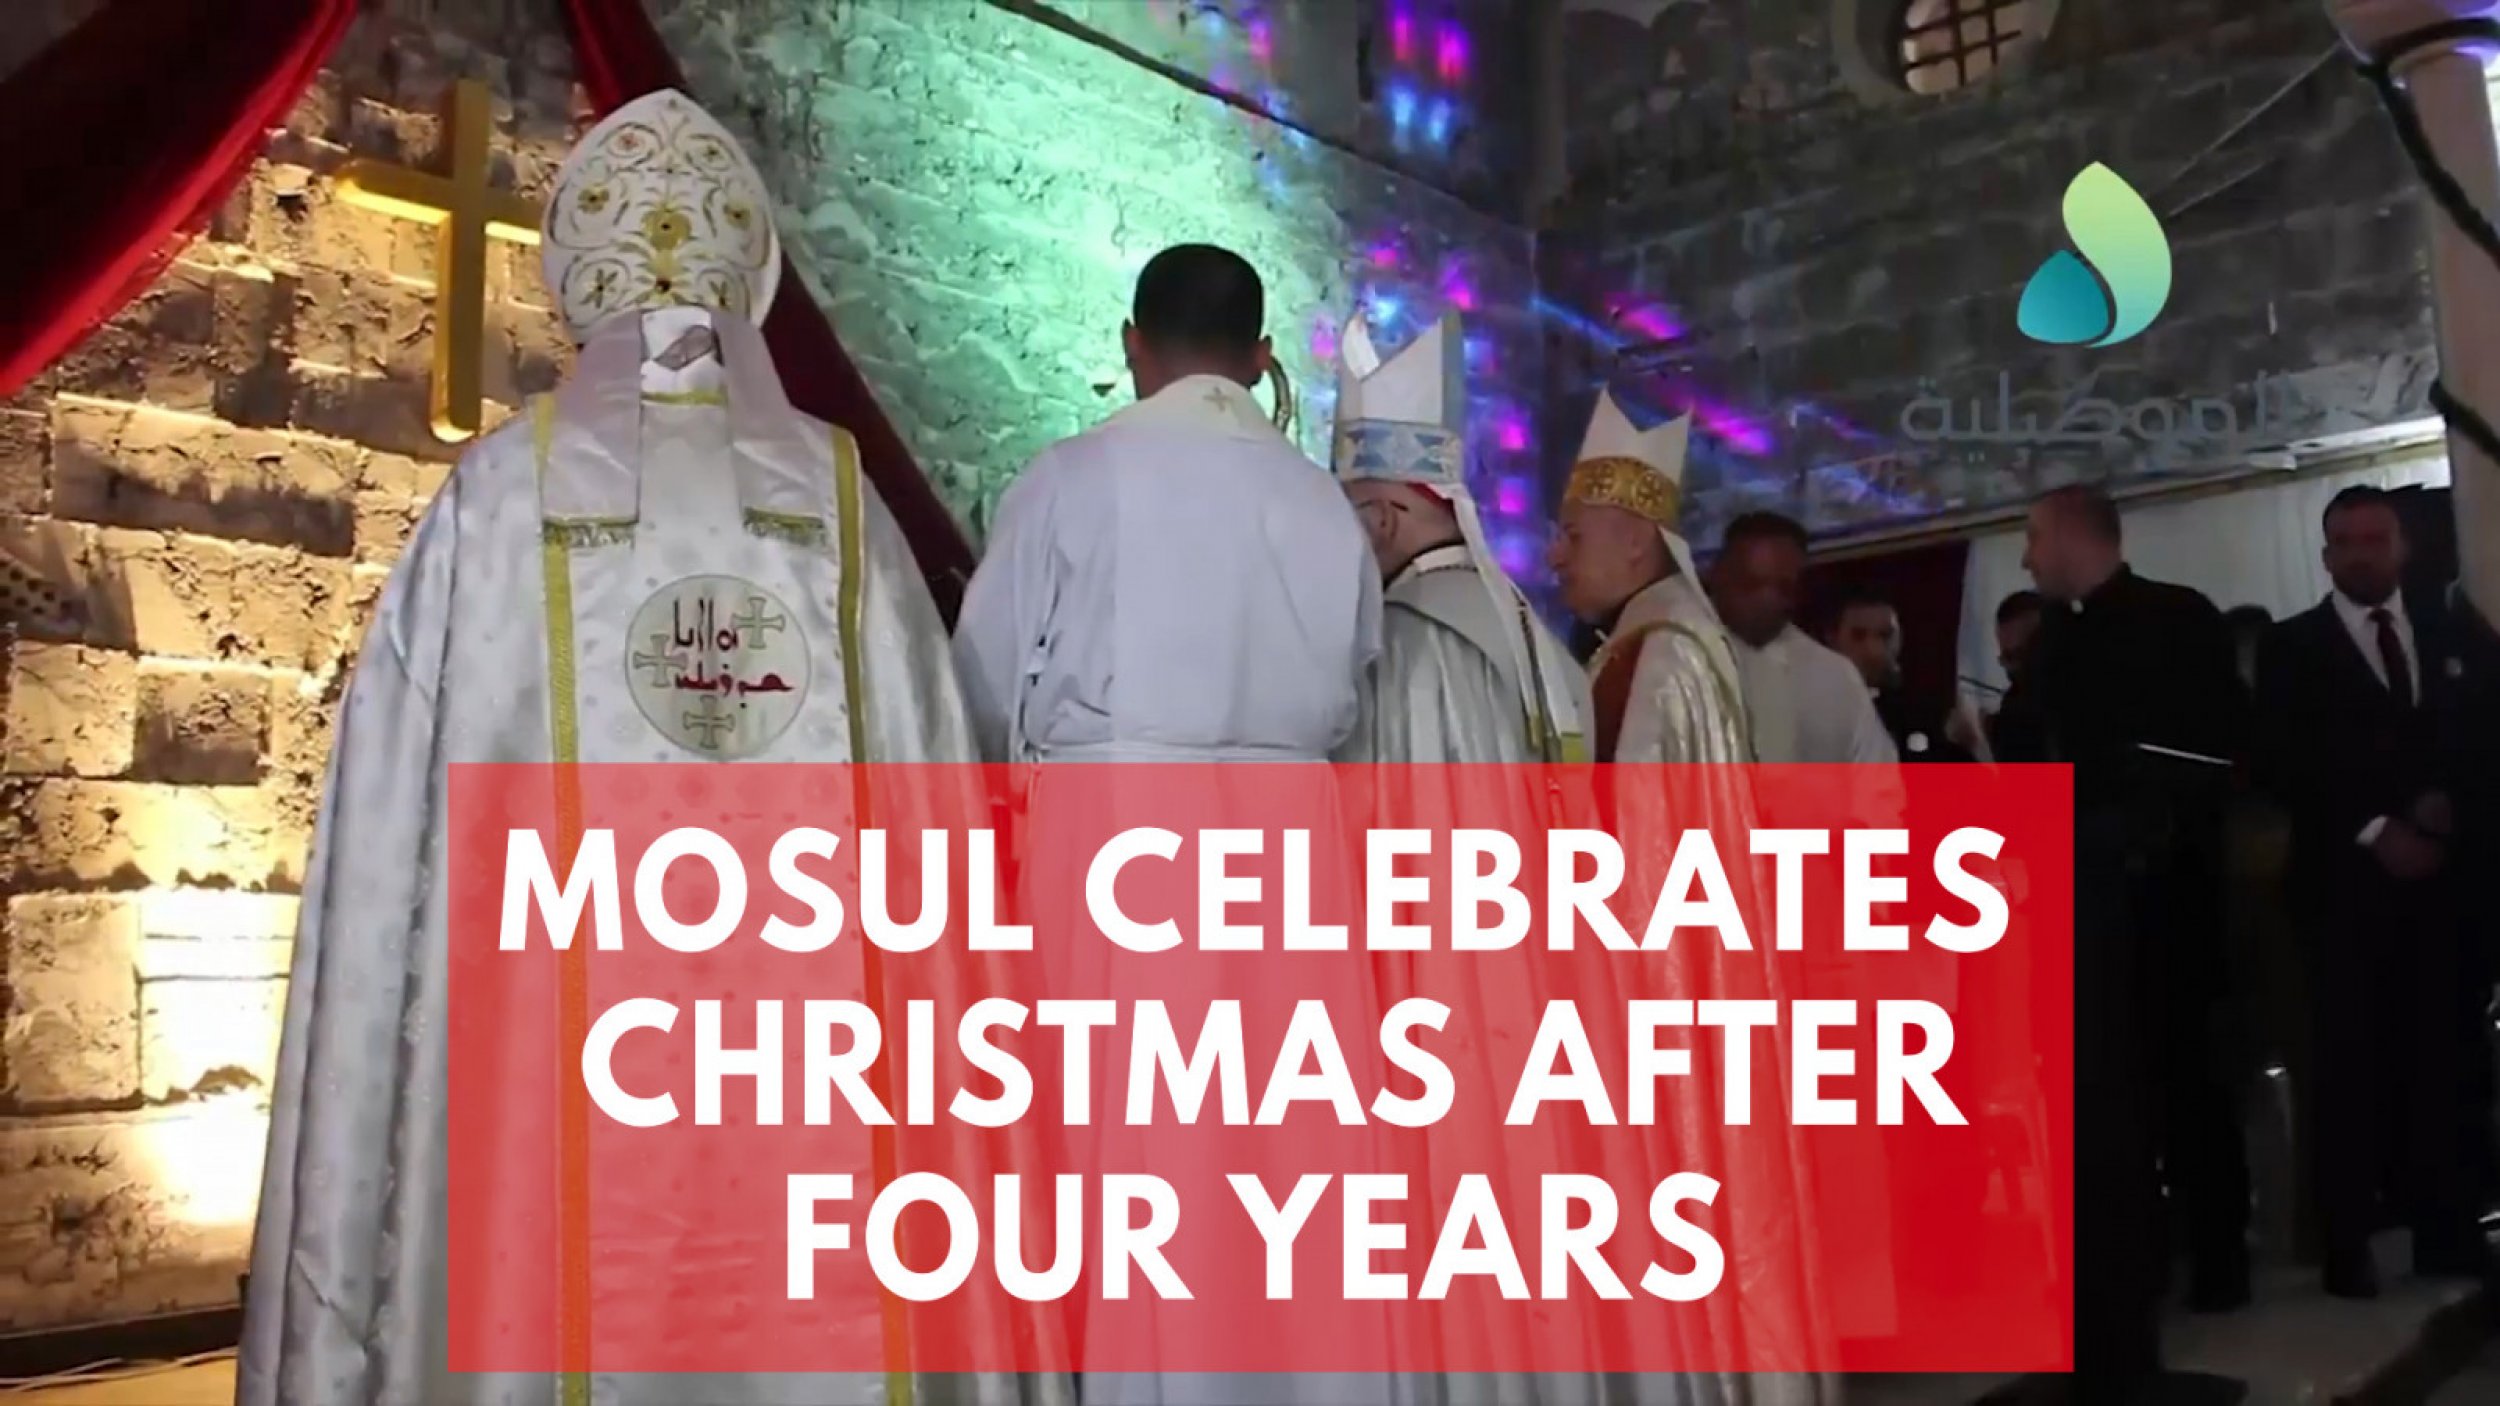 Christians In Mosul Celebrate Christmas For The First Time In Four Years After ISIS